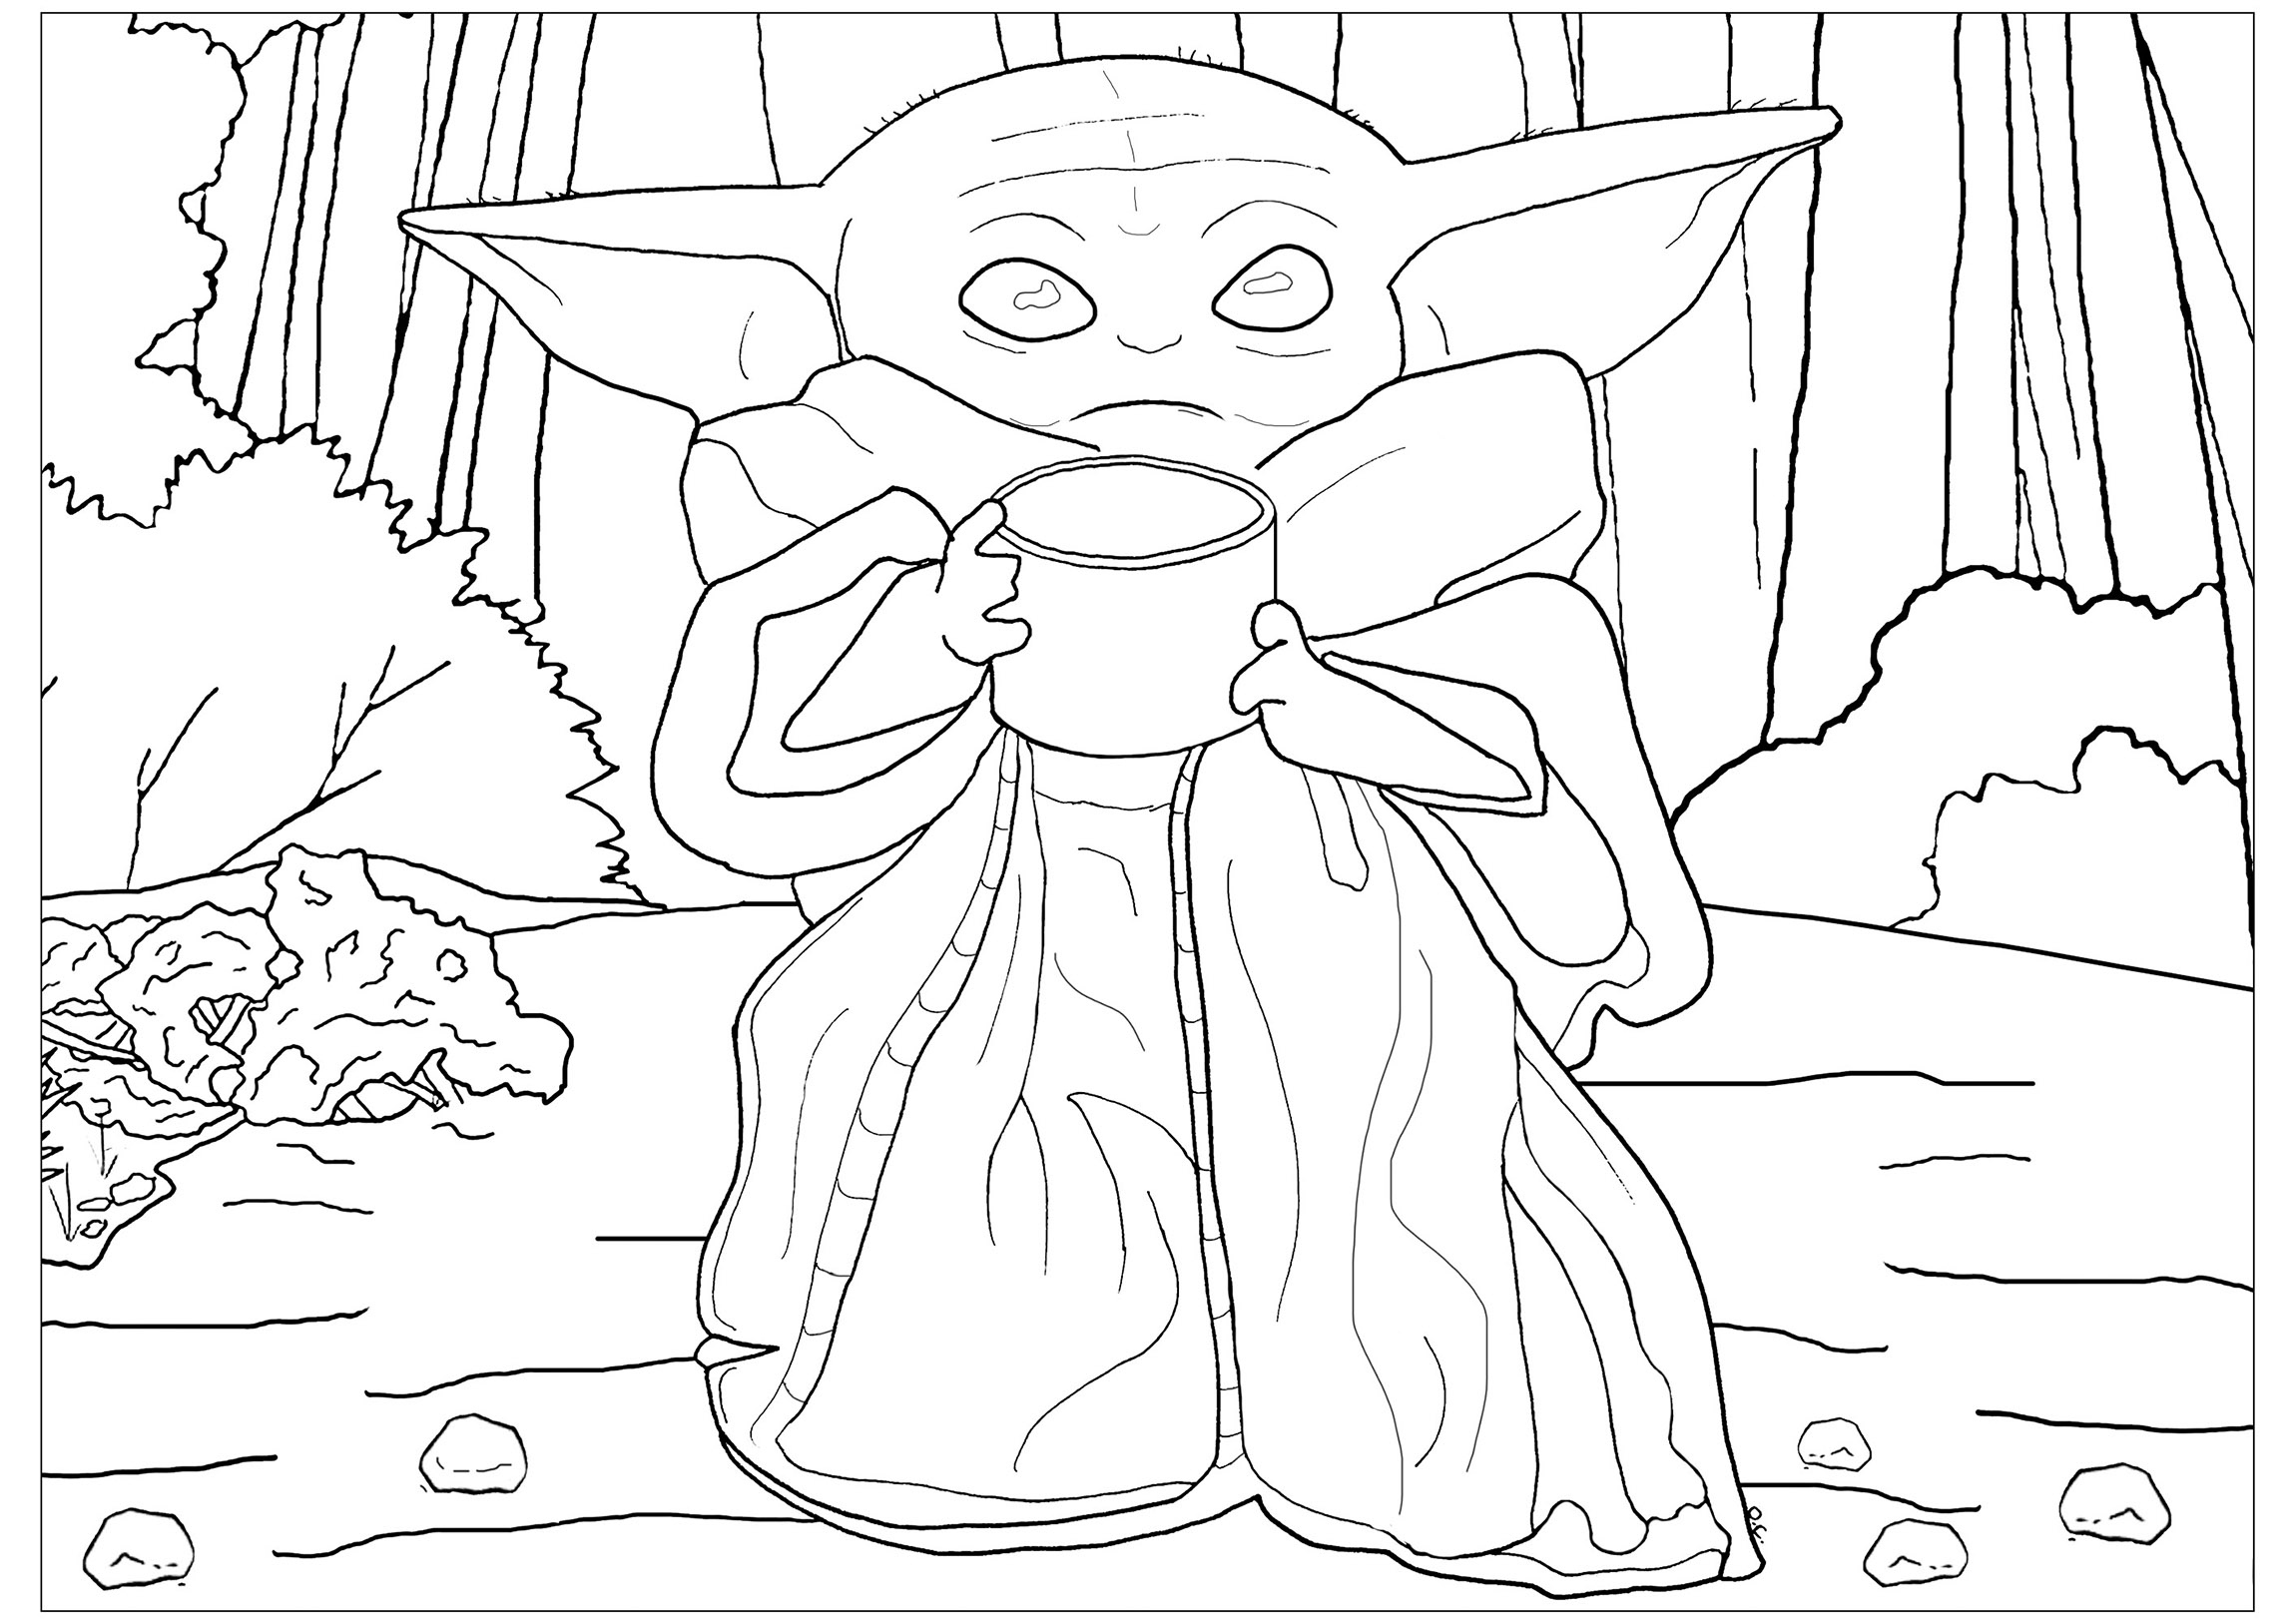 Star wars free to color for children - Star Wars Kids Coloring Pages